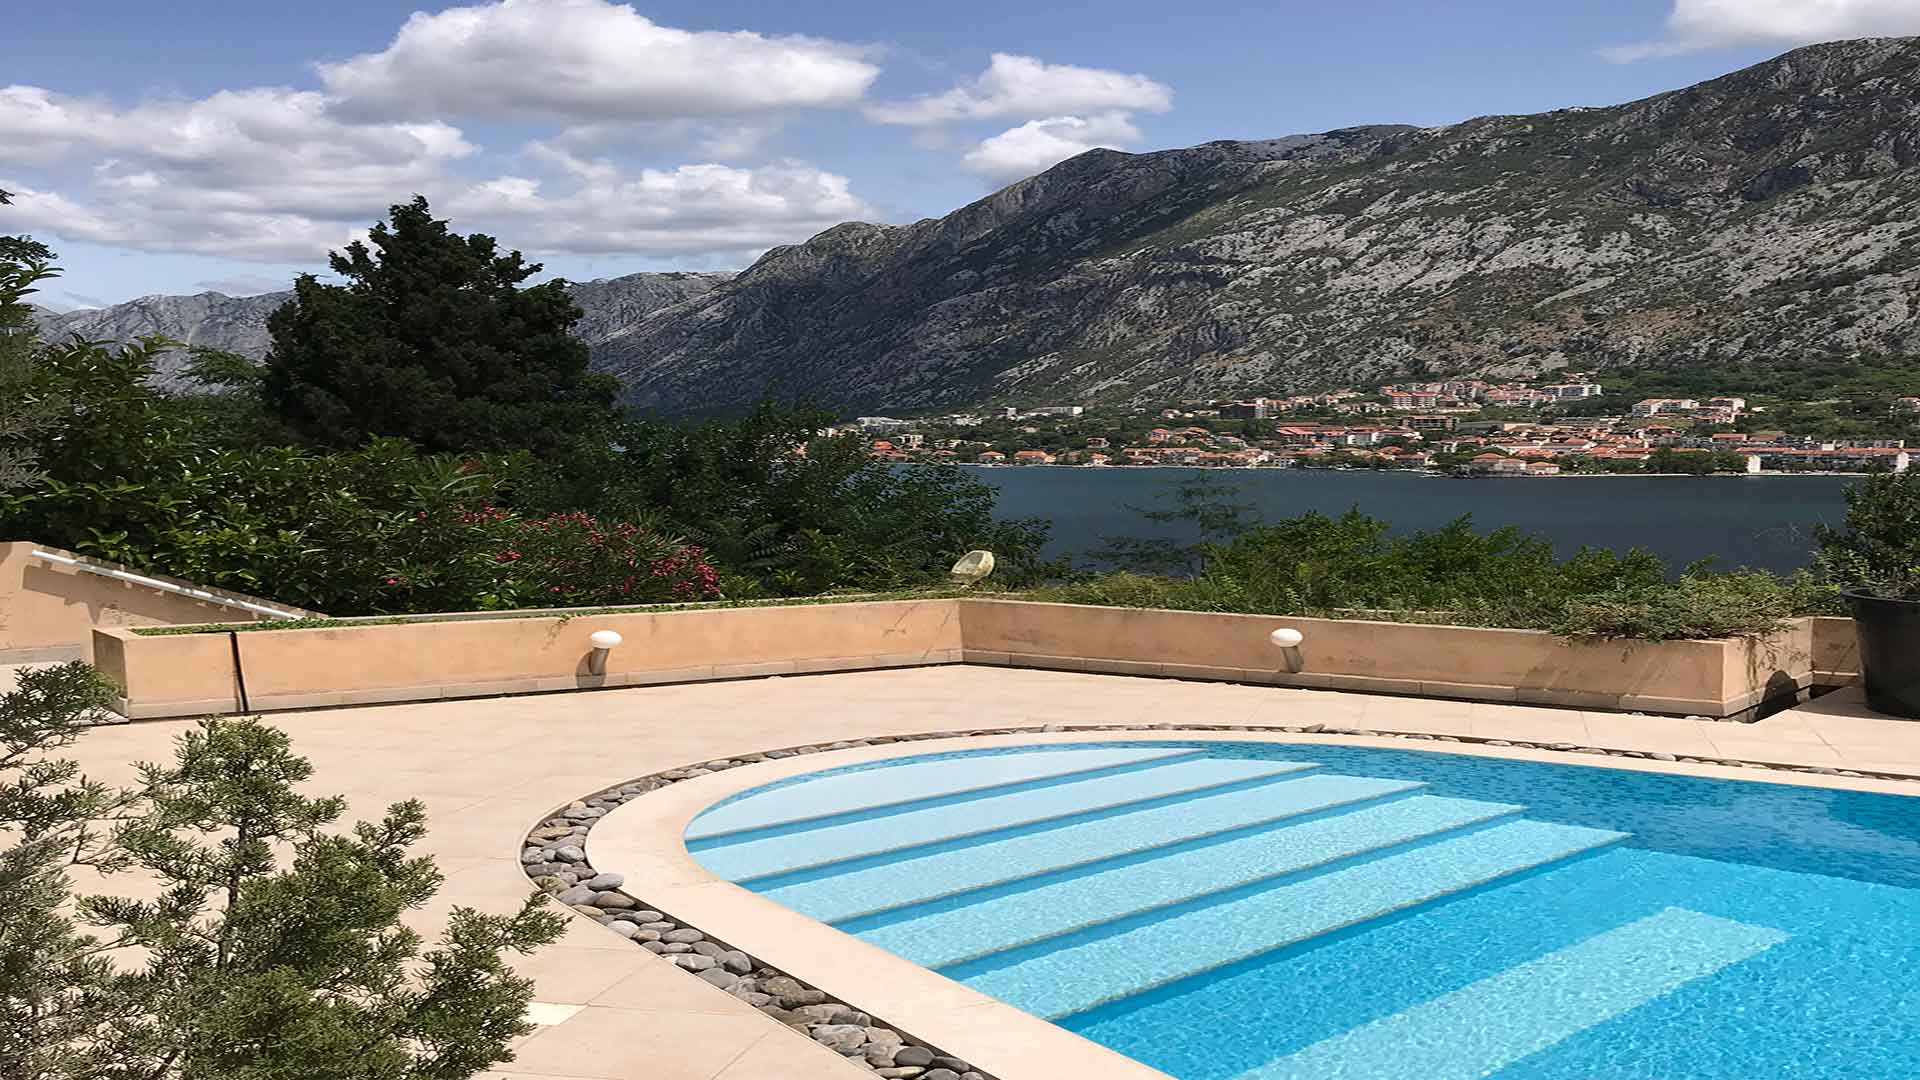 Apartment-for-sale-Muo-Kotor-19-3